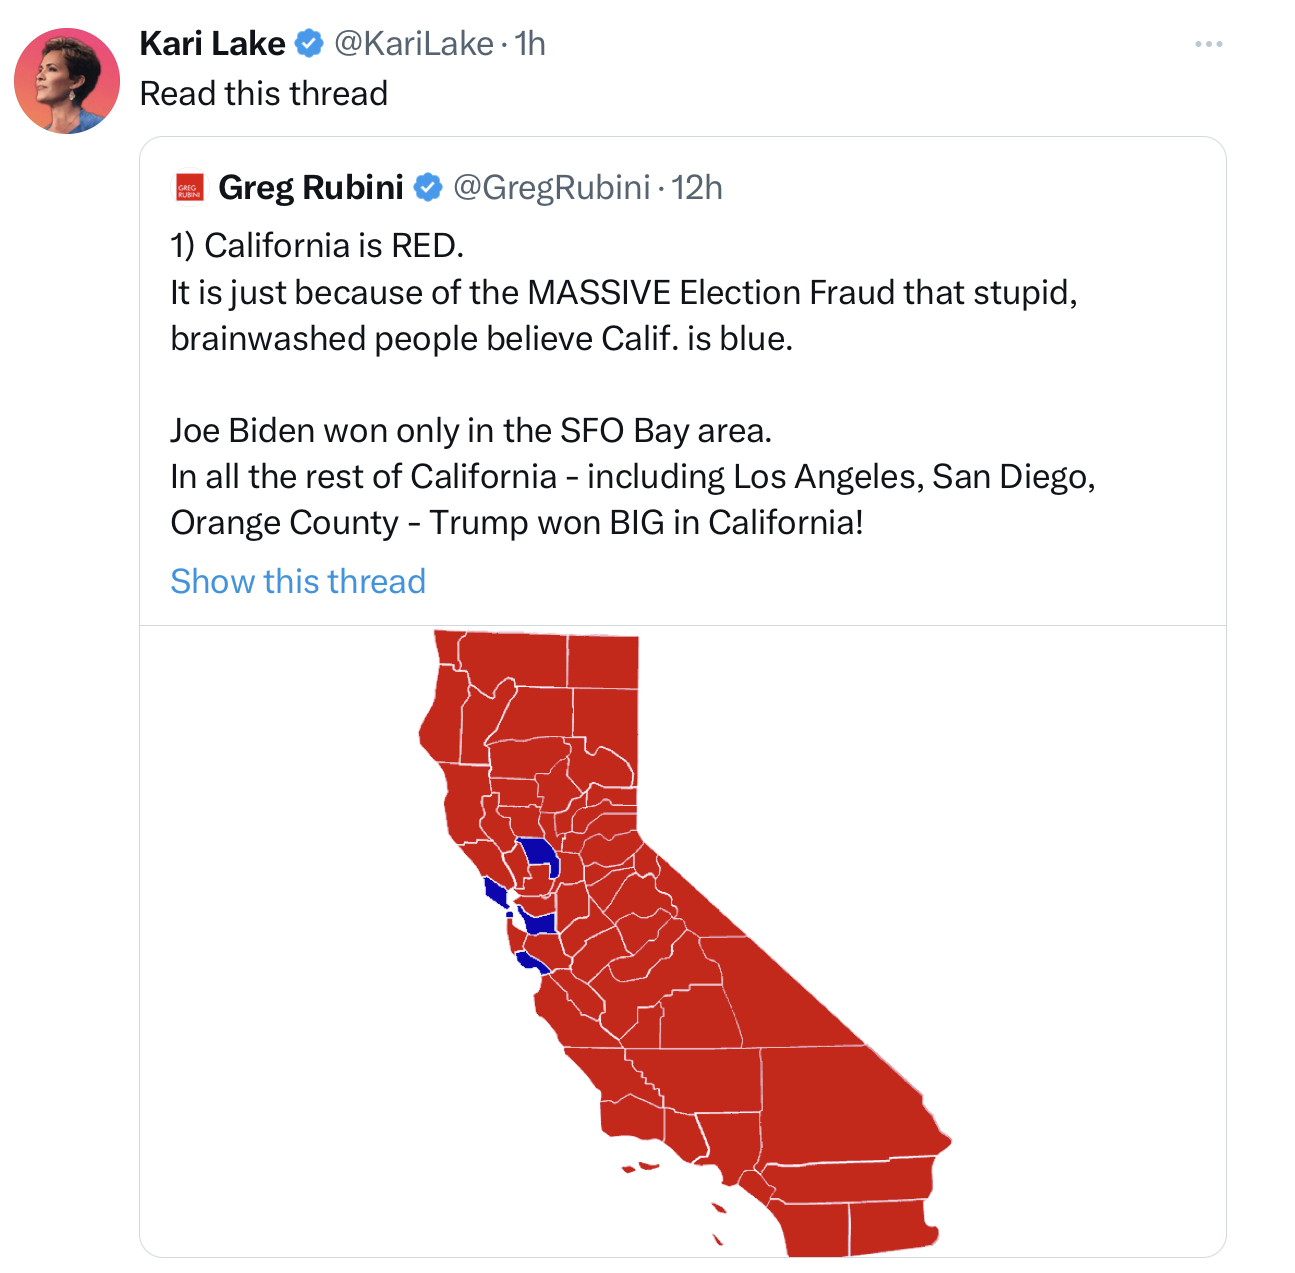 California is predominently conservative